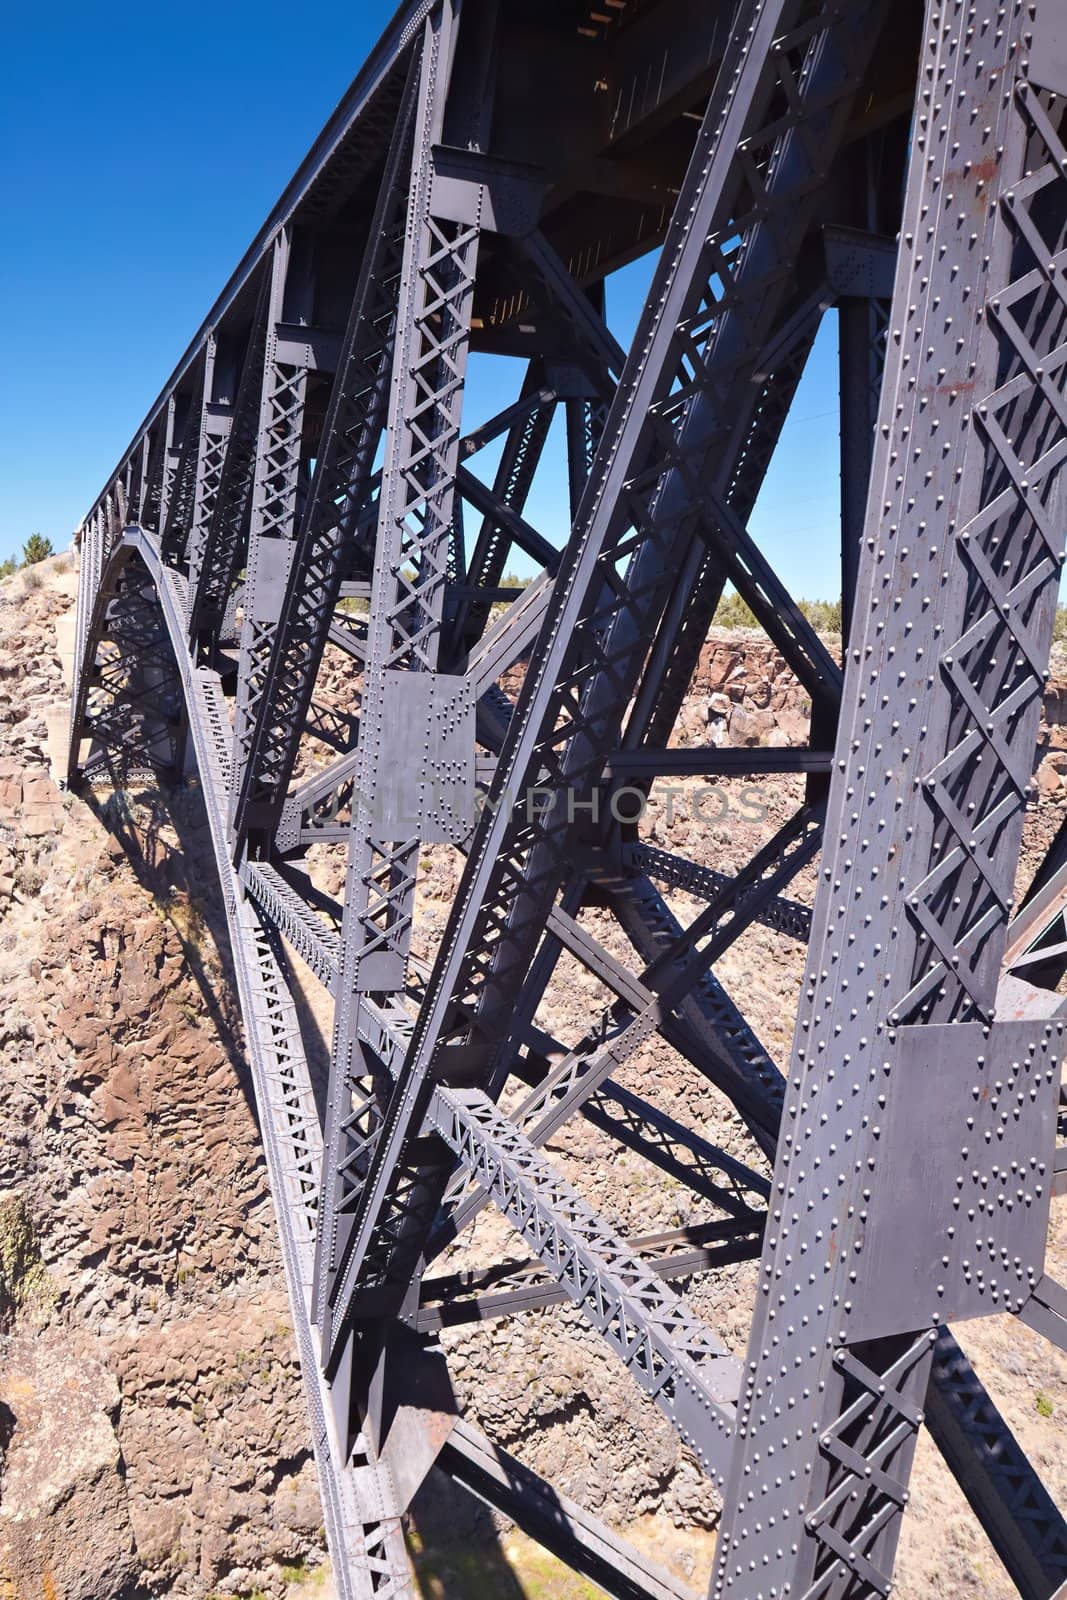 Railroad Bridge over Canyon by LoonChild